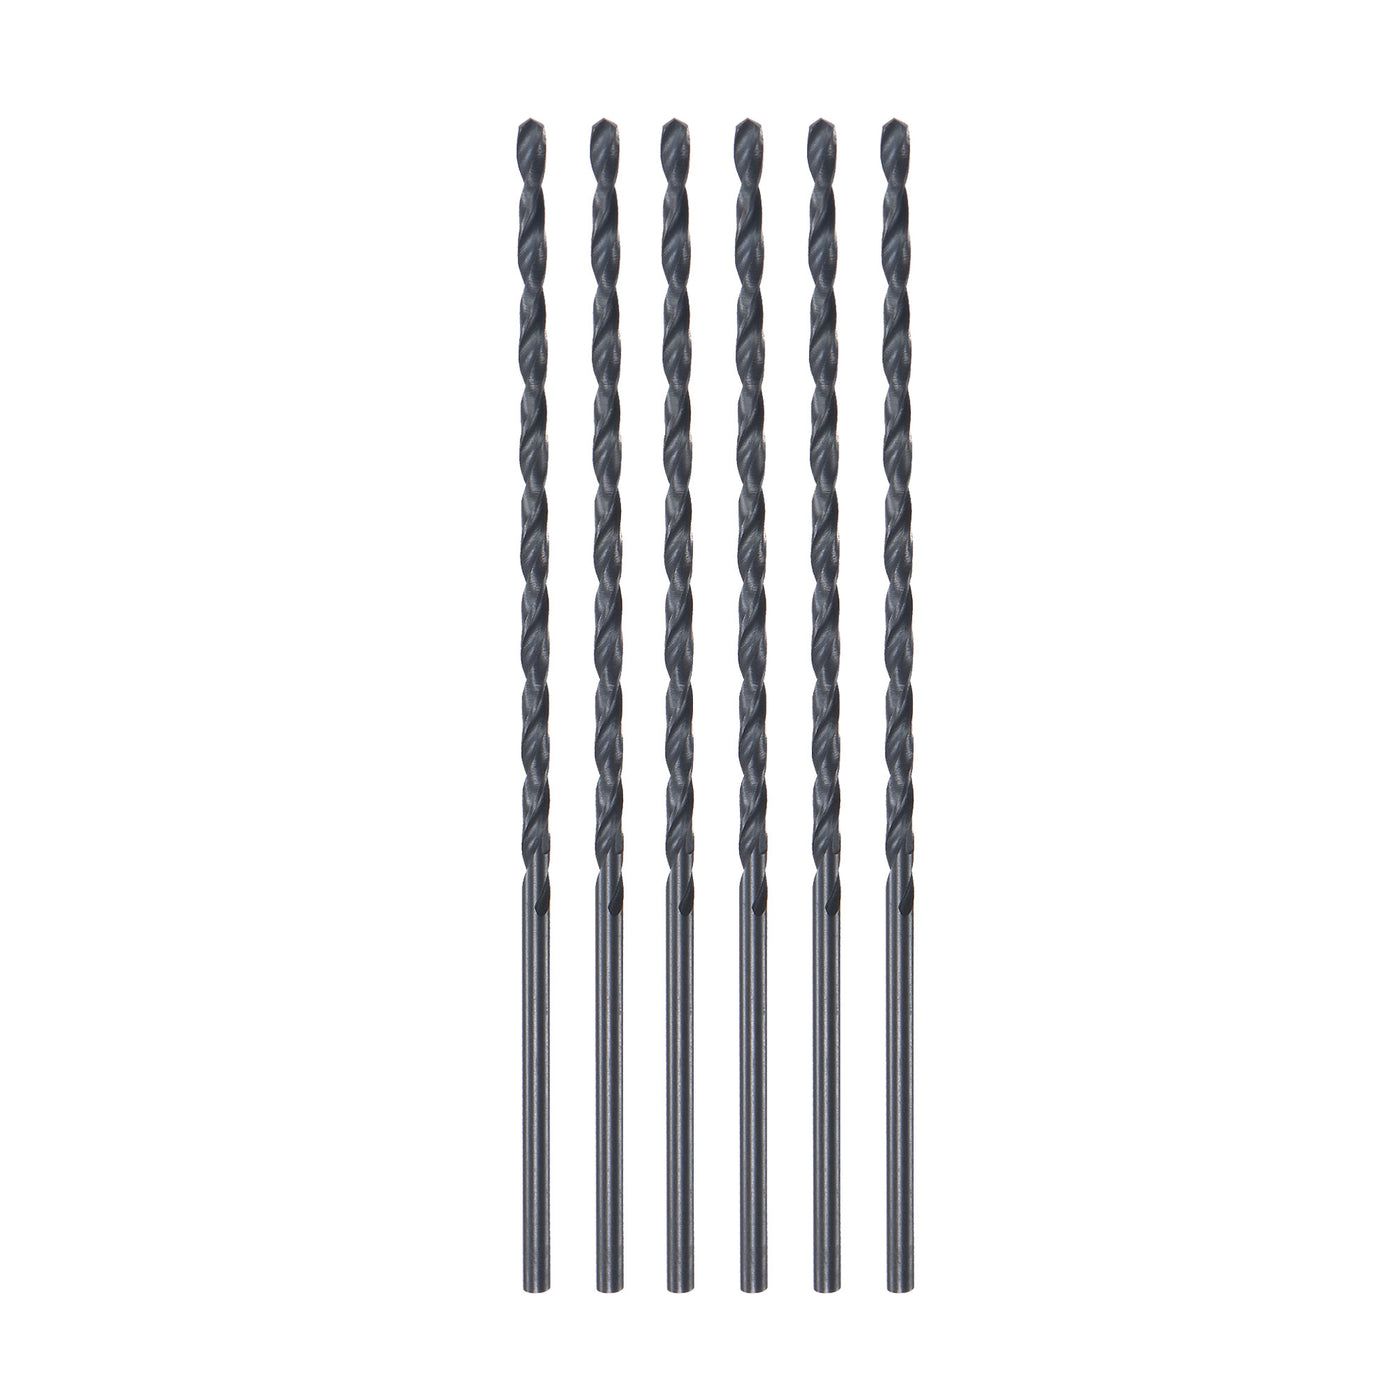 uxcell Uxcell High Speed Steel Lengthen Twist Drill Bit 2mm Fully Ground Black Oxide 6Pcs